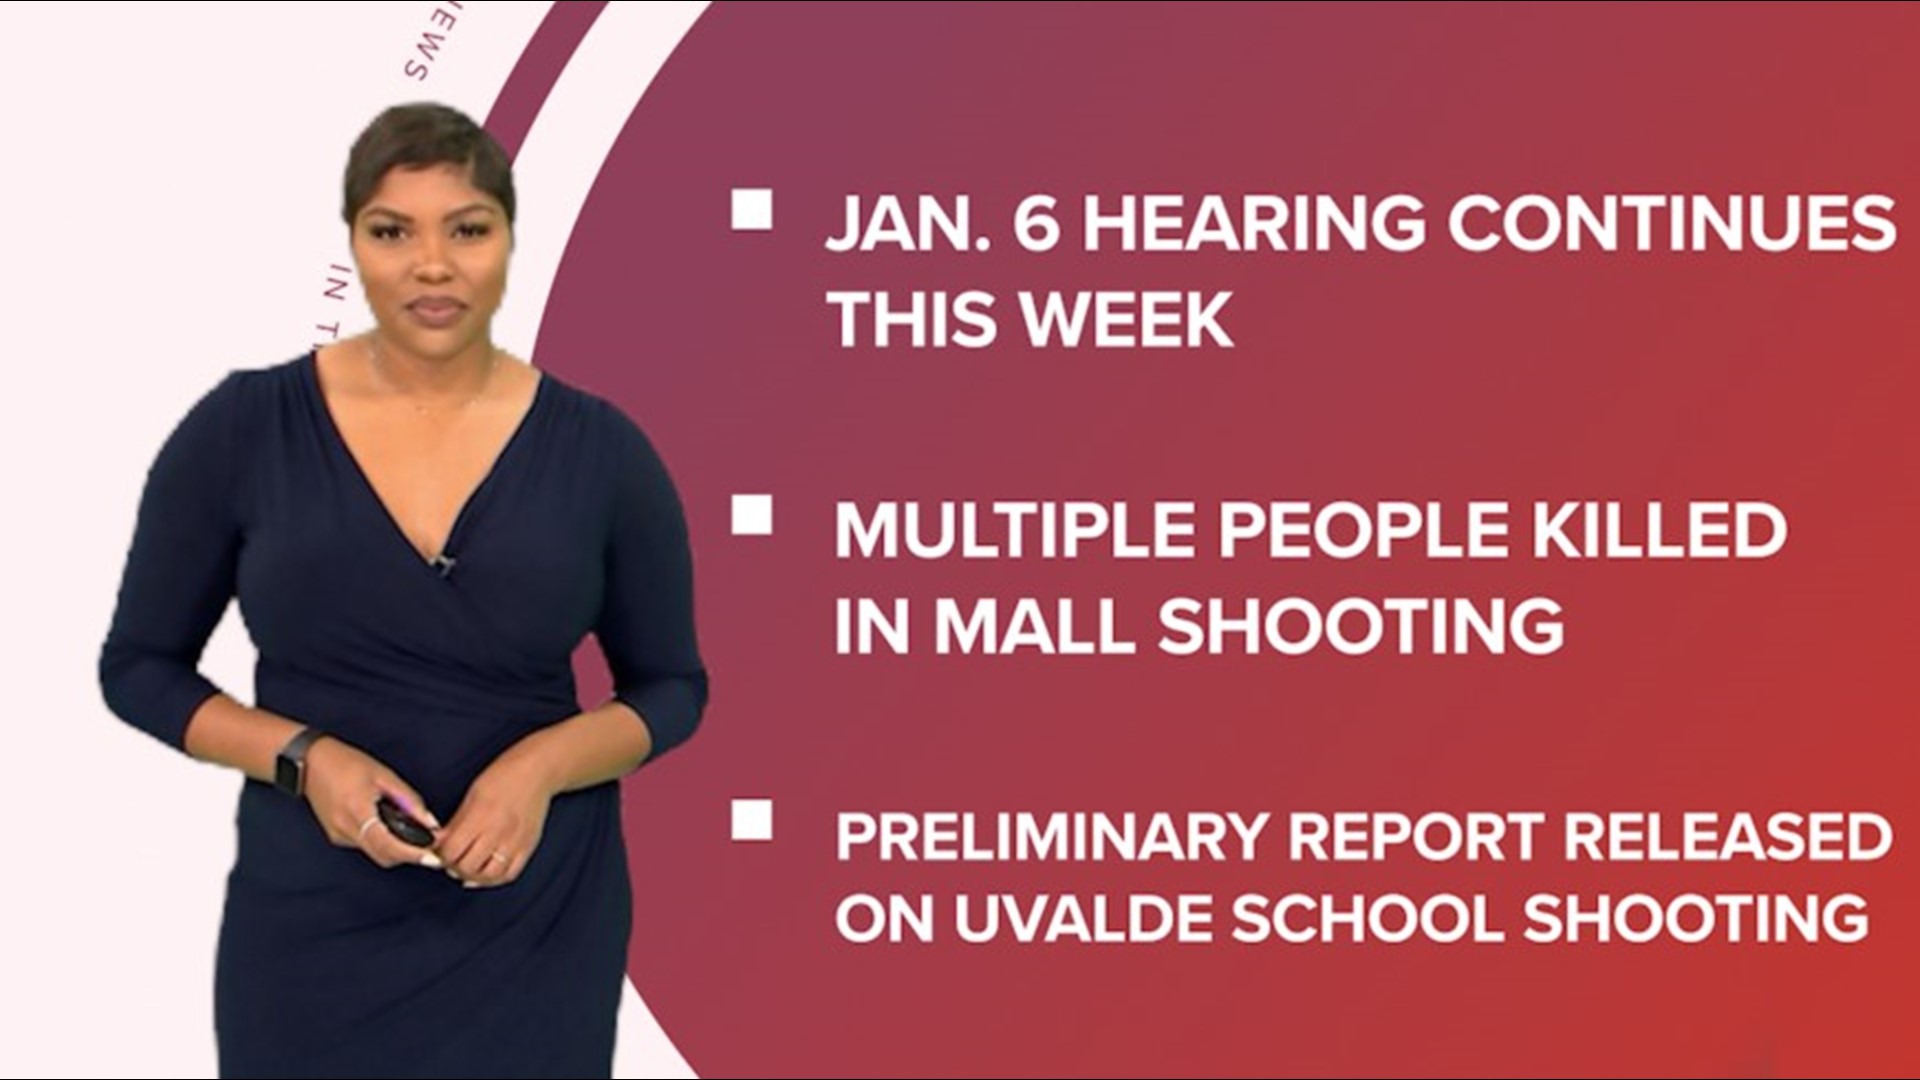 A look at what is happening across the U.S. from a preview into this week’s Jan. 6 hearing to a shooting at an IN mall and a report released of the Ulvade shooting